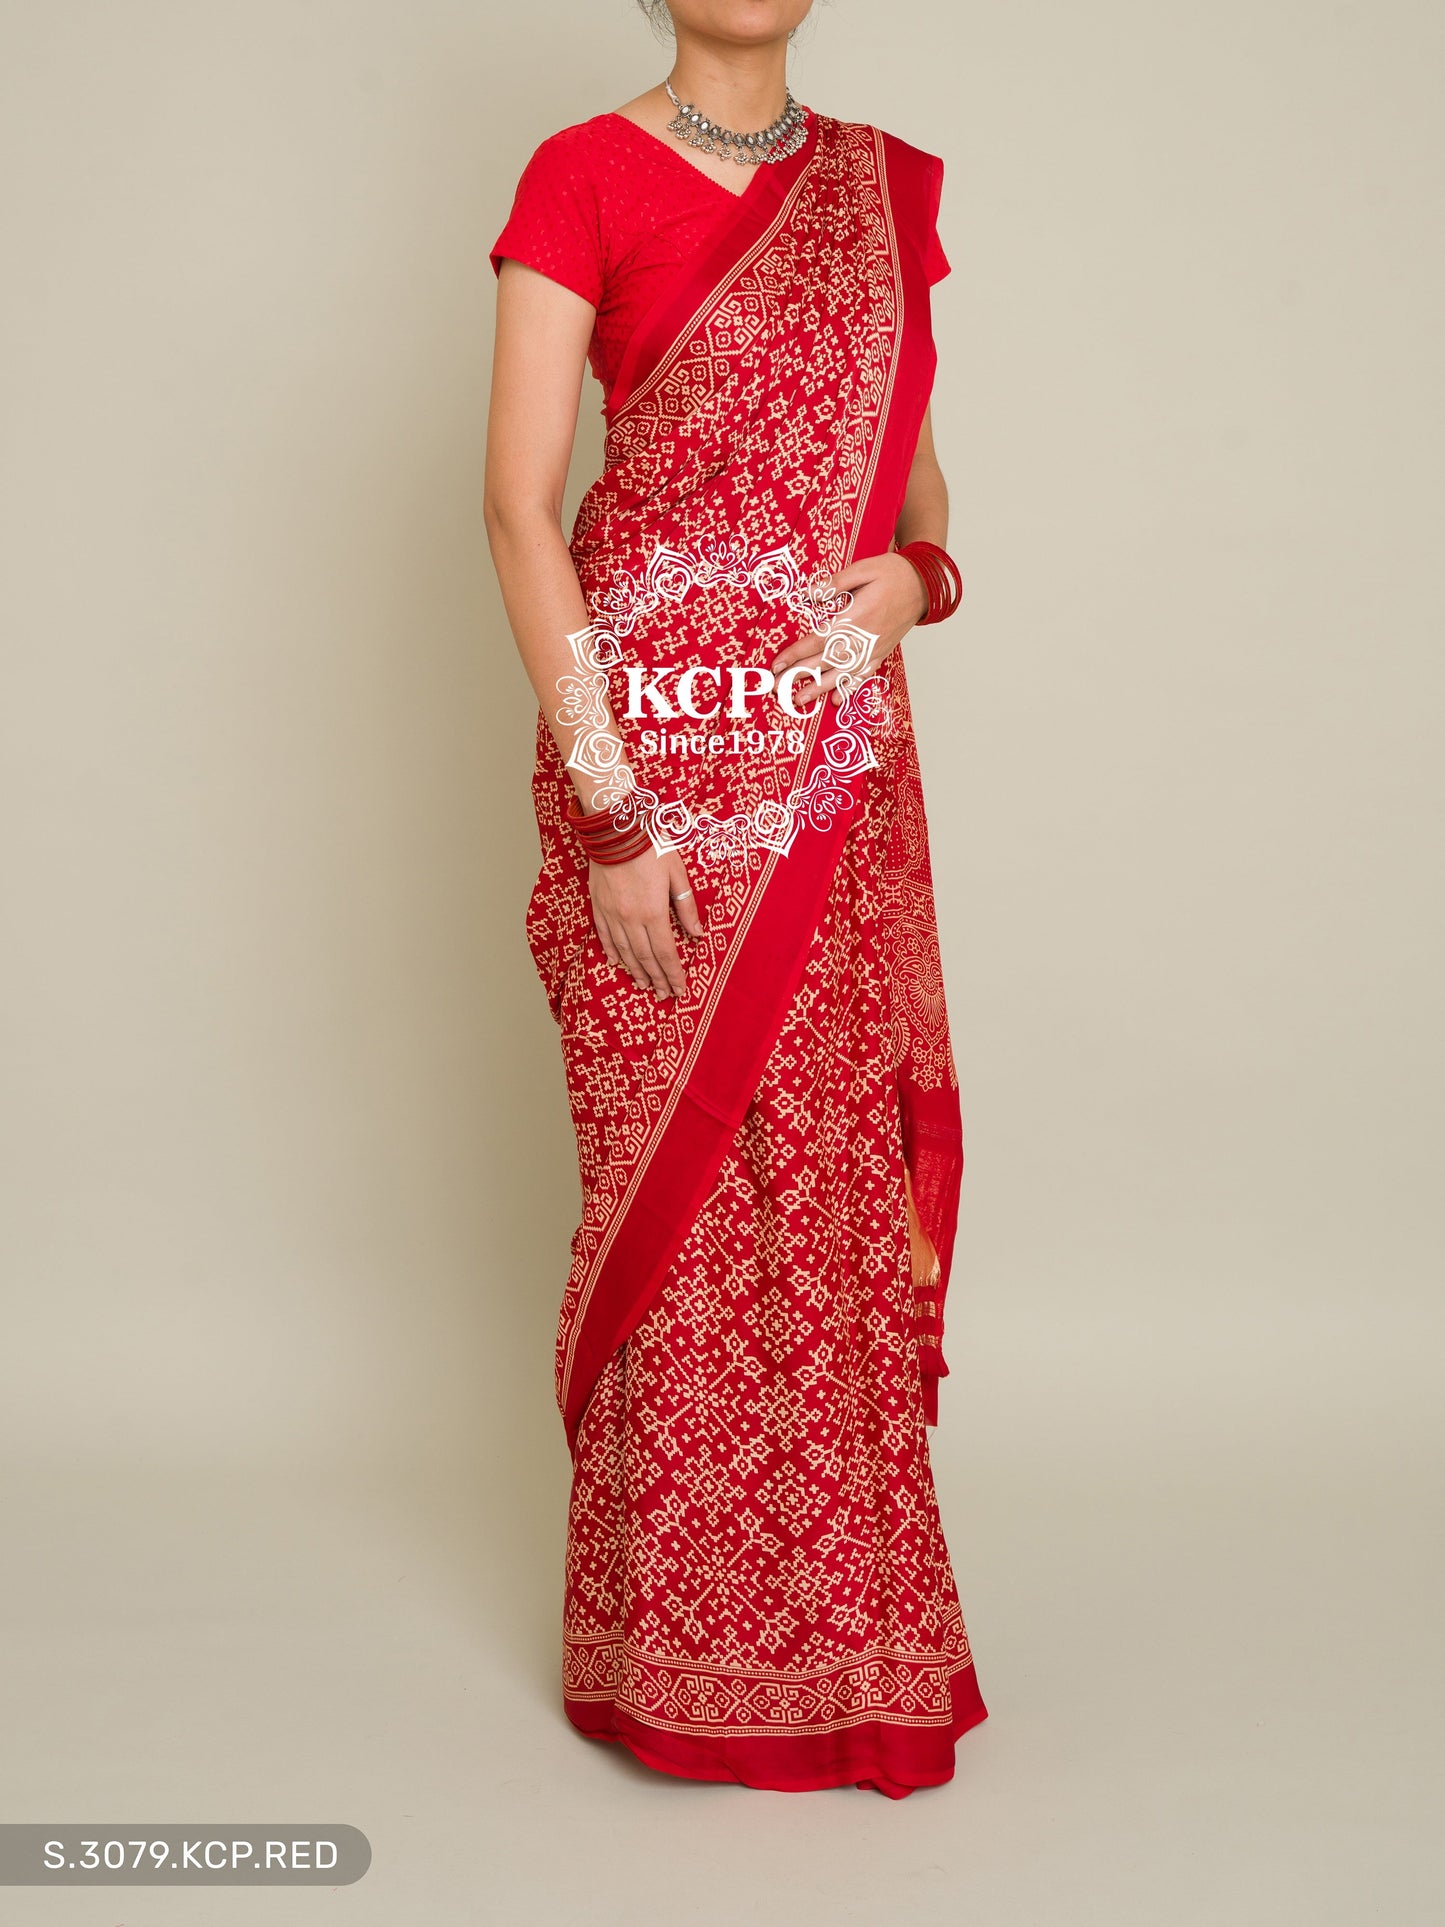 Pure Ajrakh modal silk with patola style saree, KCPC, DR